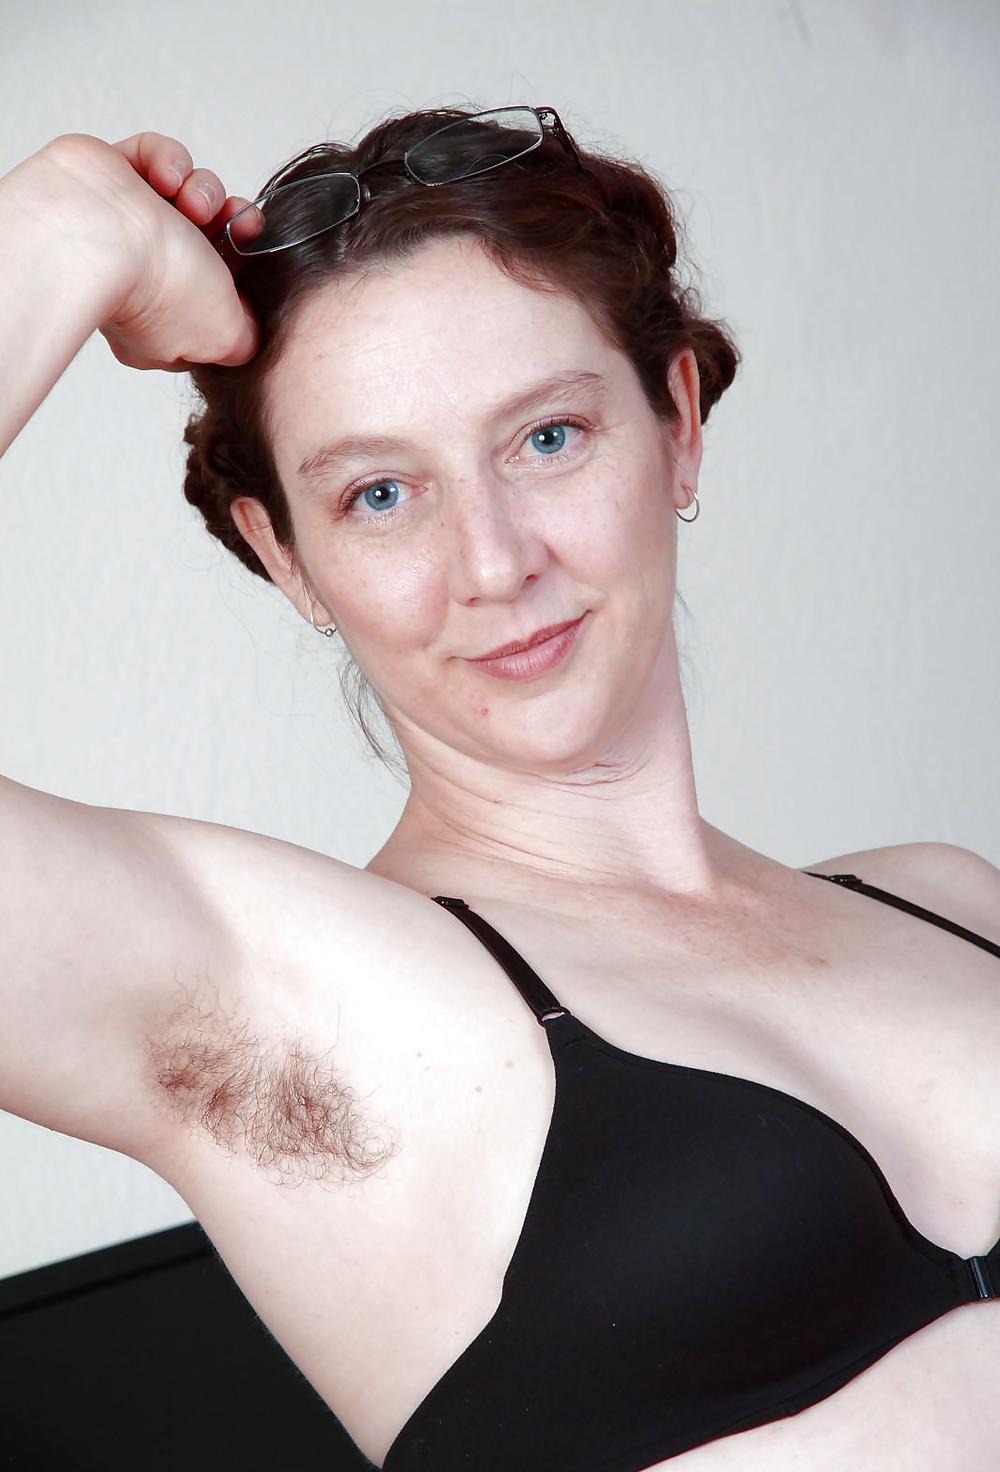 Girls with hairy, unshaven armpits A #37050185